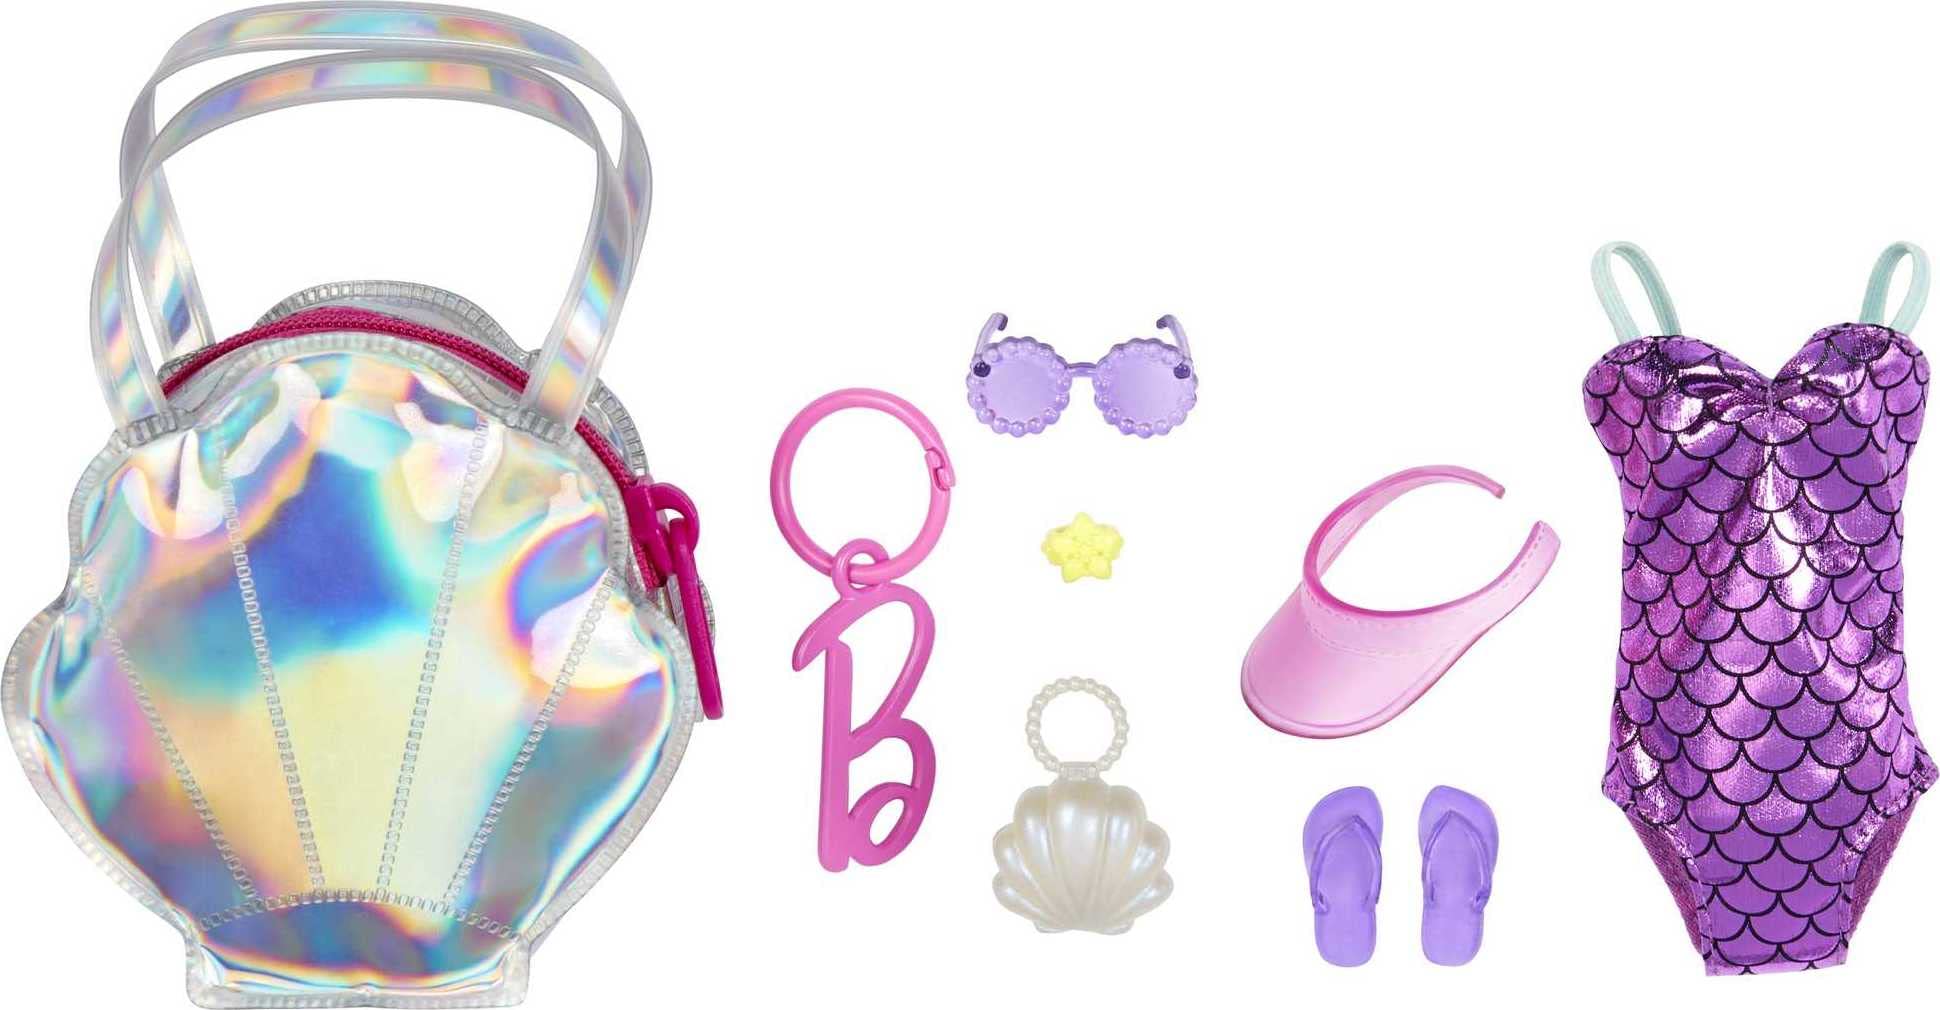 Barbie Clothes, Deluxe Clip-On Beach Bag with Swimsuit and Five Themed Accessories for Barbie Dolls